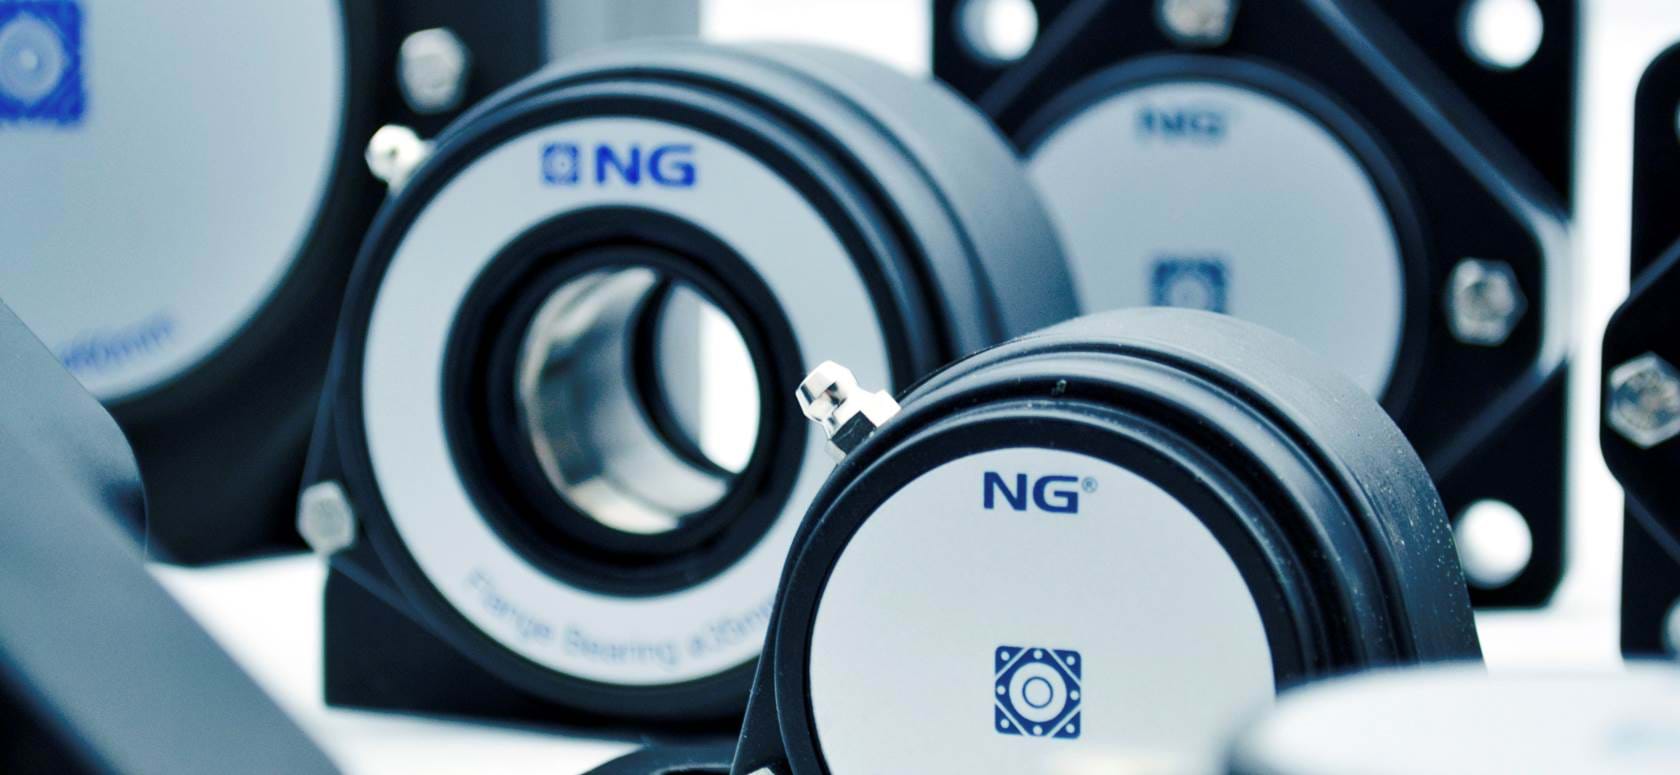  NG pillow block bearing units with open and closed covers